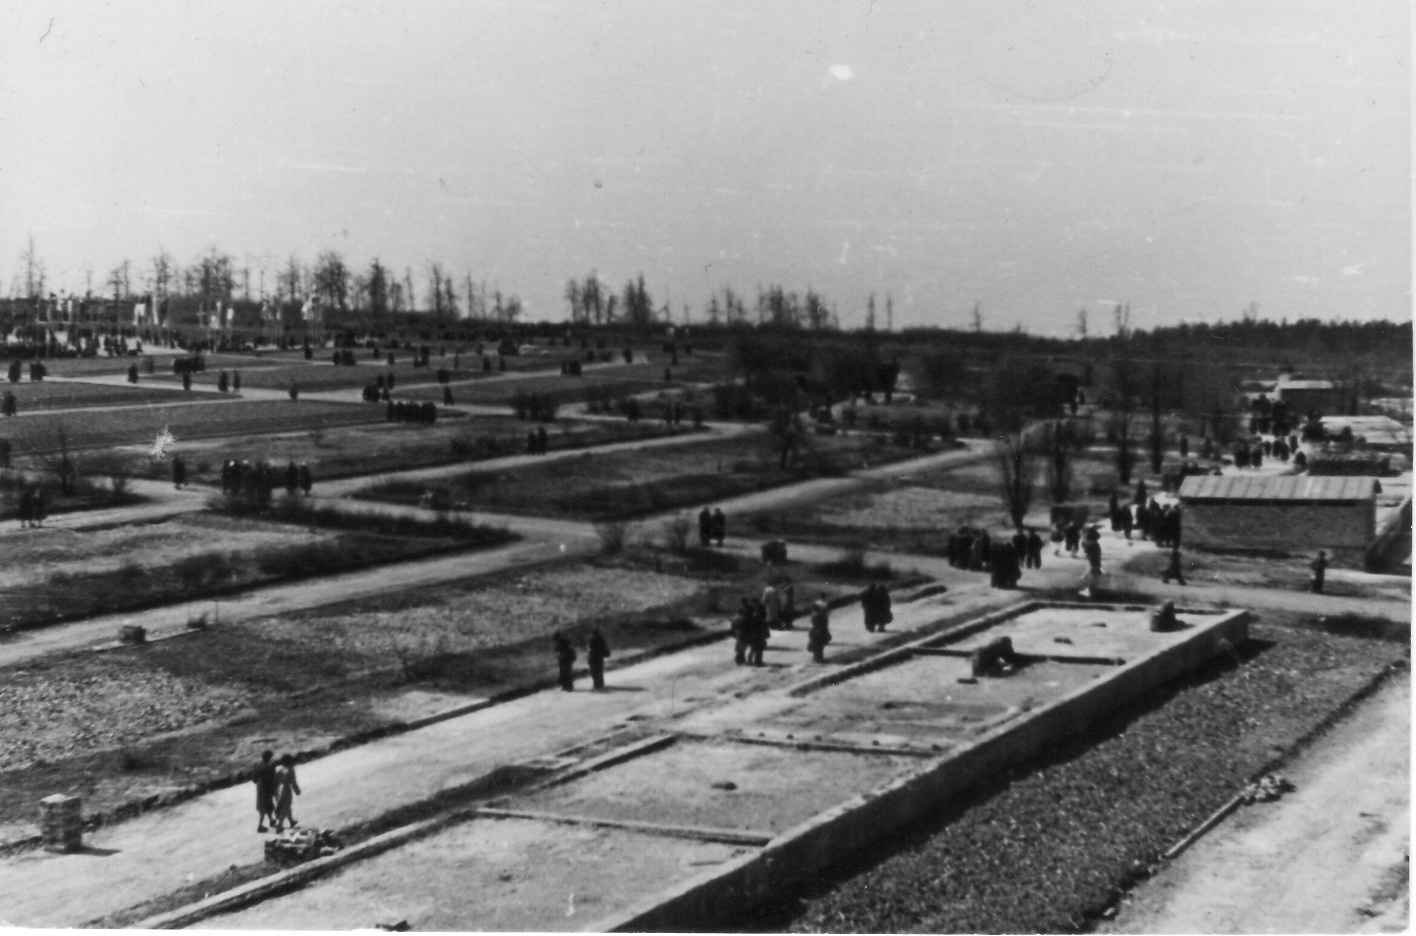  View from the chamber building to the southwest, in front the foundation of stone barrack No. 13. The two barrack fields in the center of the picture indicate the location of the so-called isolator (barracks No. 19 and No. 20), two barracks separated from the rest of the camp and surrounded by a high barbed wire fence. The barracks are only visible through their foundations. Numerous people walk on paths across the grounds.